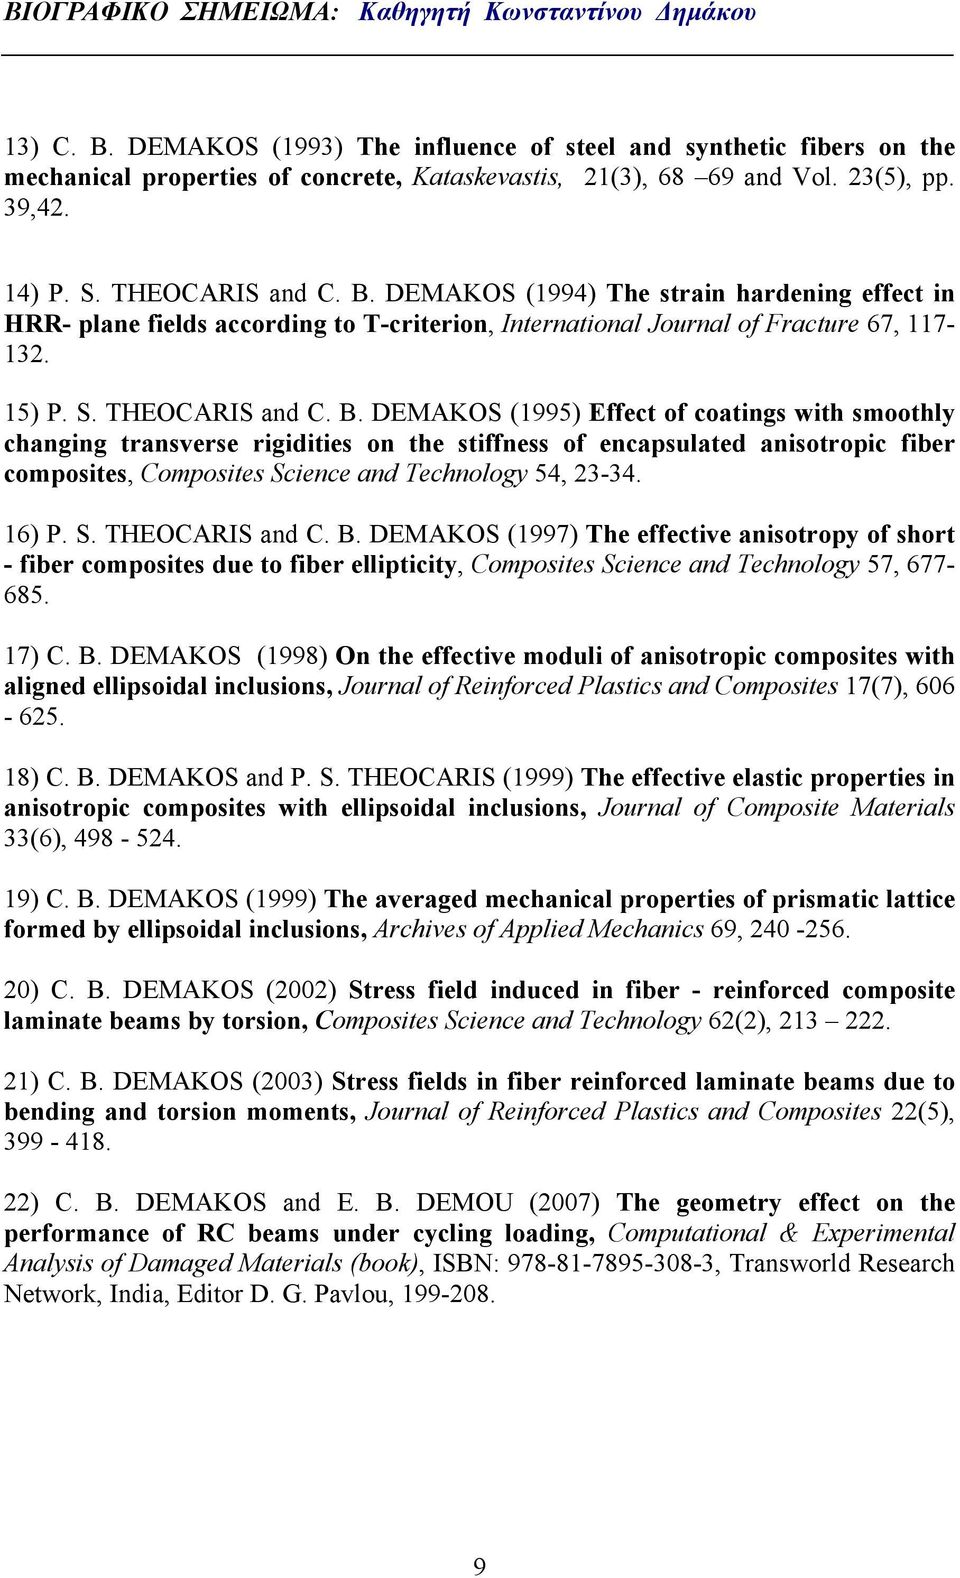 DEMAKOS (1995) Effect of coatings with smoothly changing transverse rigidities on the stiffness of encapsulated anisotropic fiber composites, Composites Science and Technology 54, 23-34. 16) P. S. THEOCARIS and C.